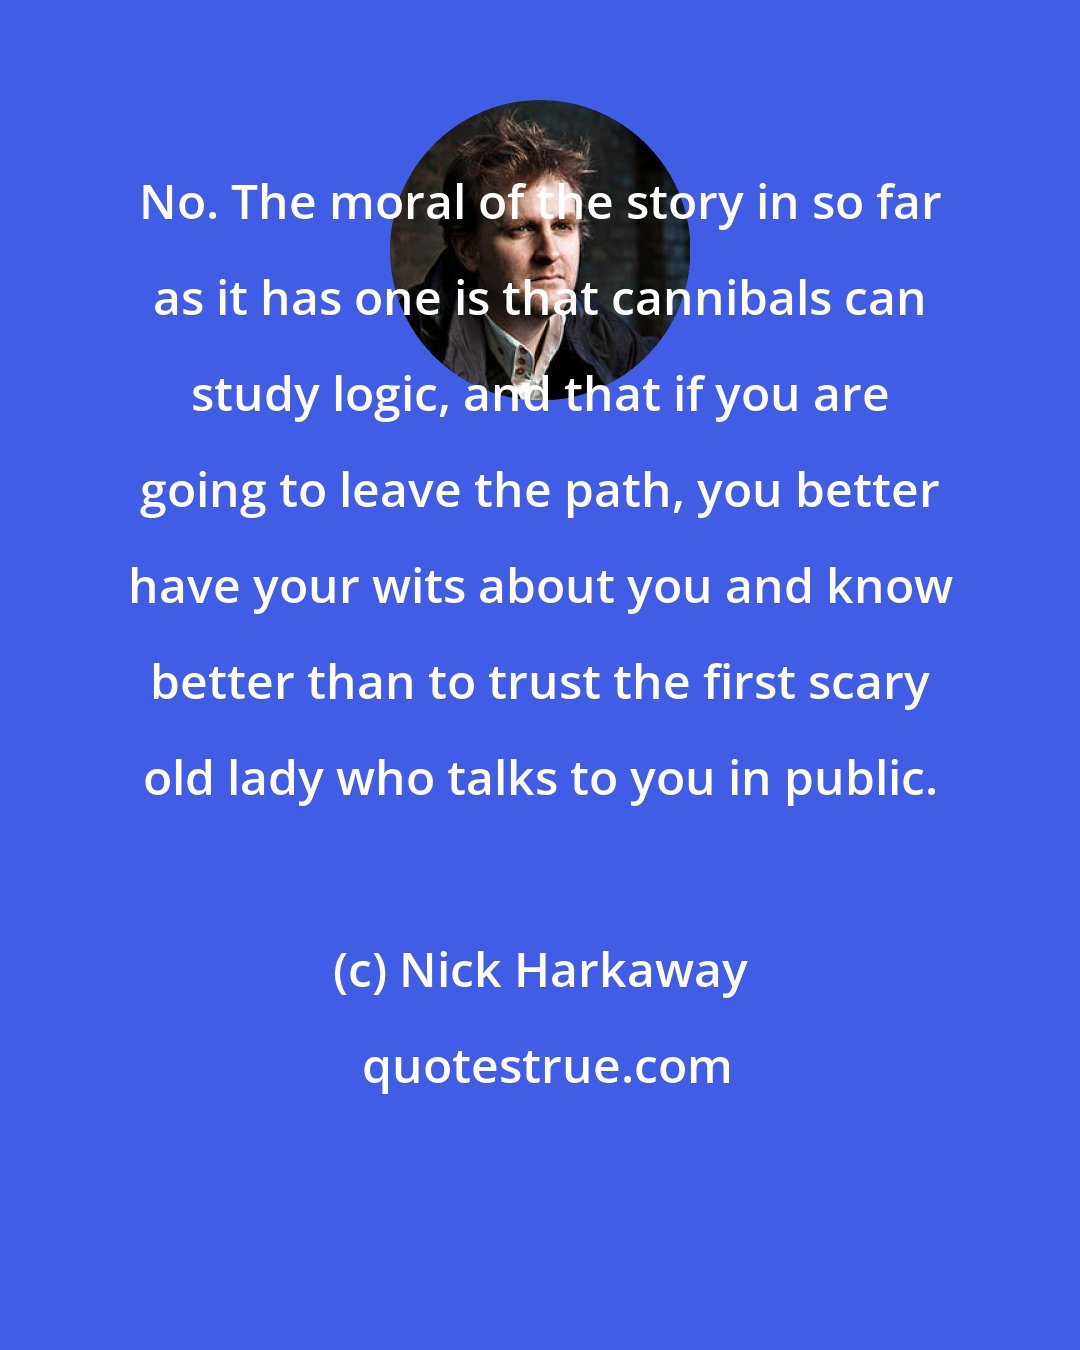 Nick Harkaway: No. The moral of the story in so far as it has one is that cannibals can study logic, and that if you are going to leave the path, you better have your wits about you and know better than to trust the first scary old lady who talks to you in public.